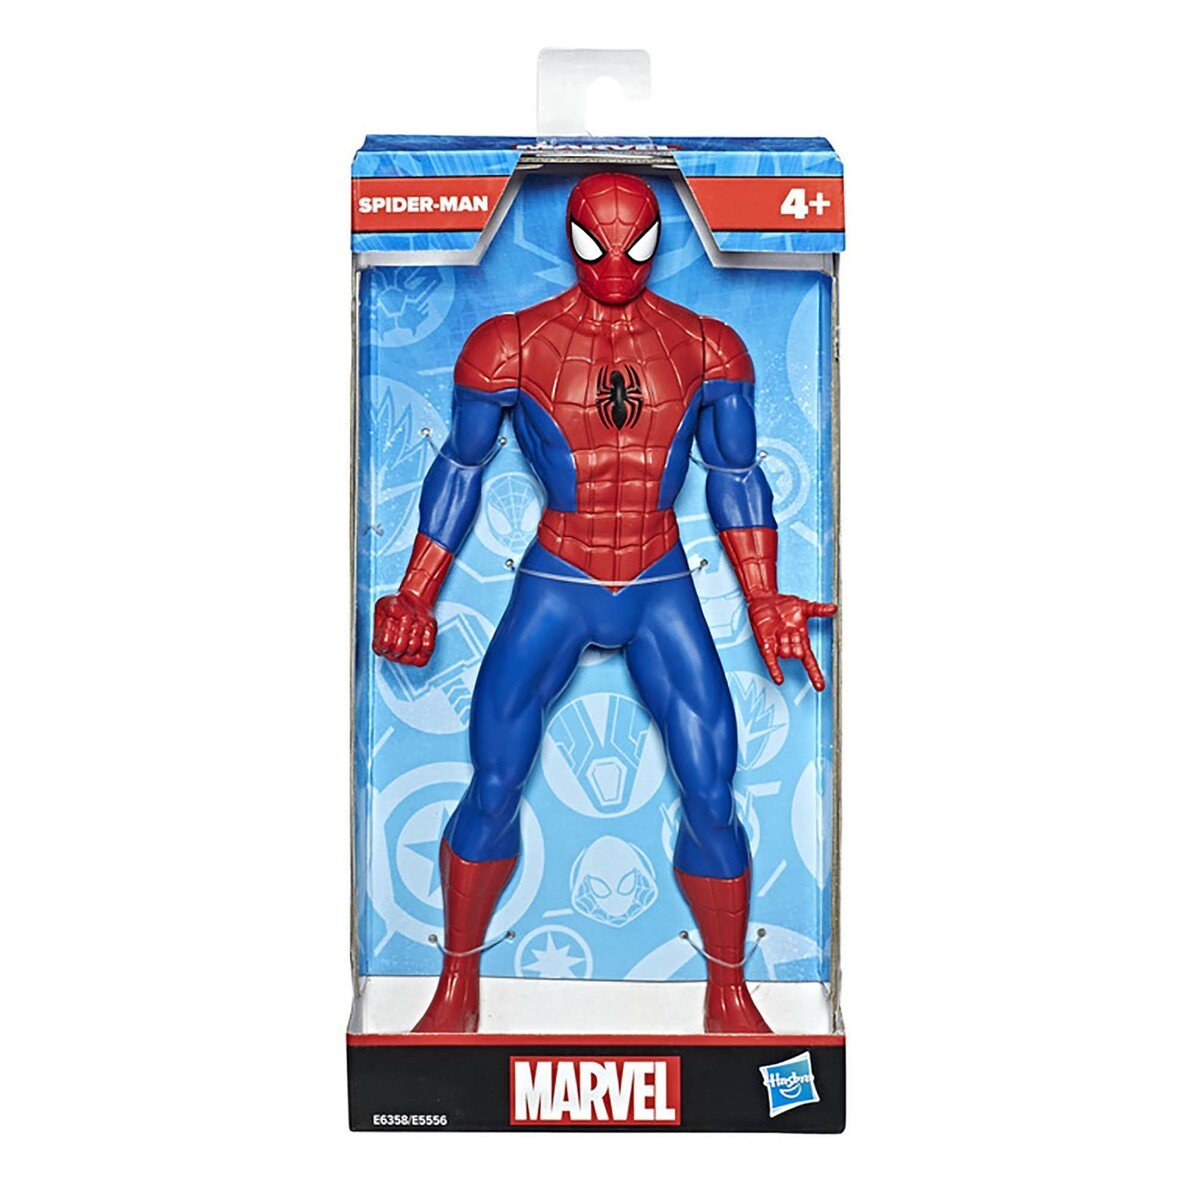 Marvel SpiderMan Action Figure 9.5-Inch Scale E6358